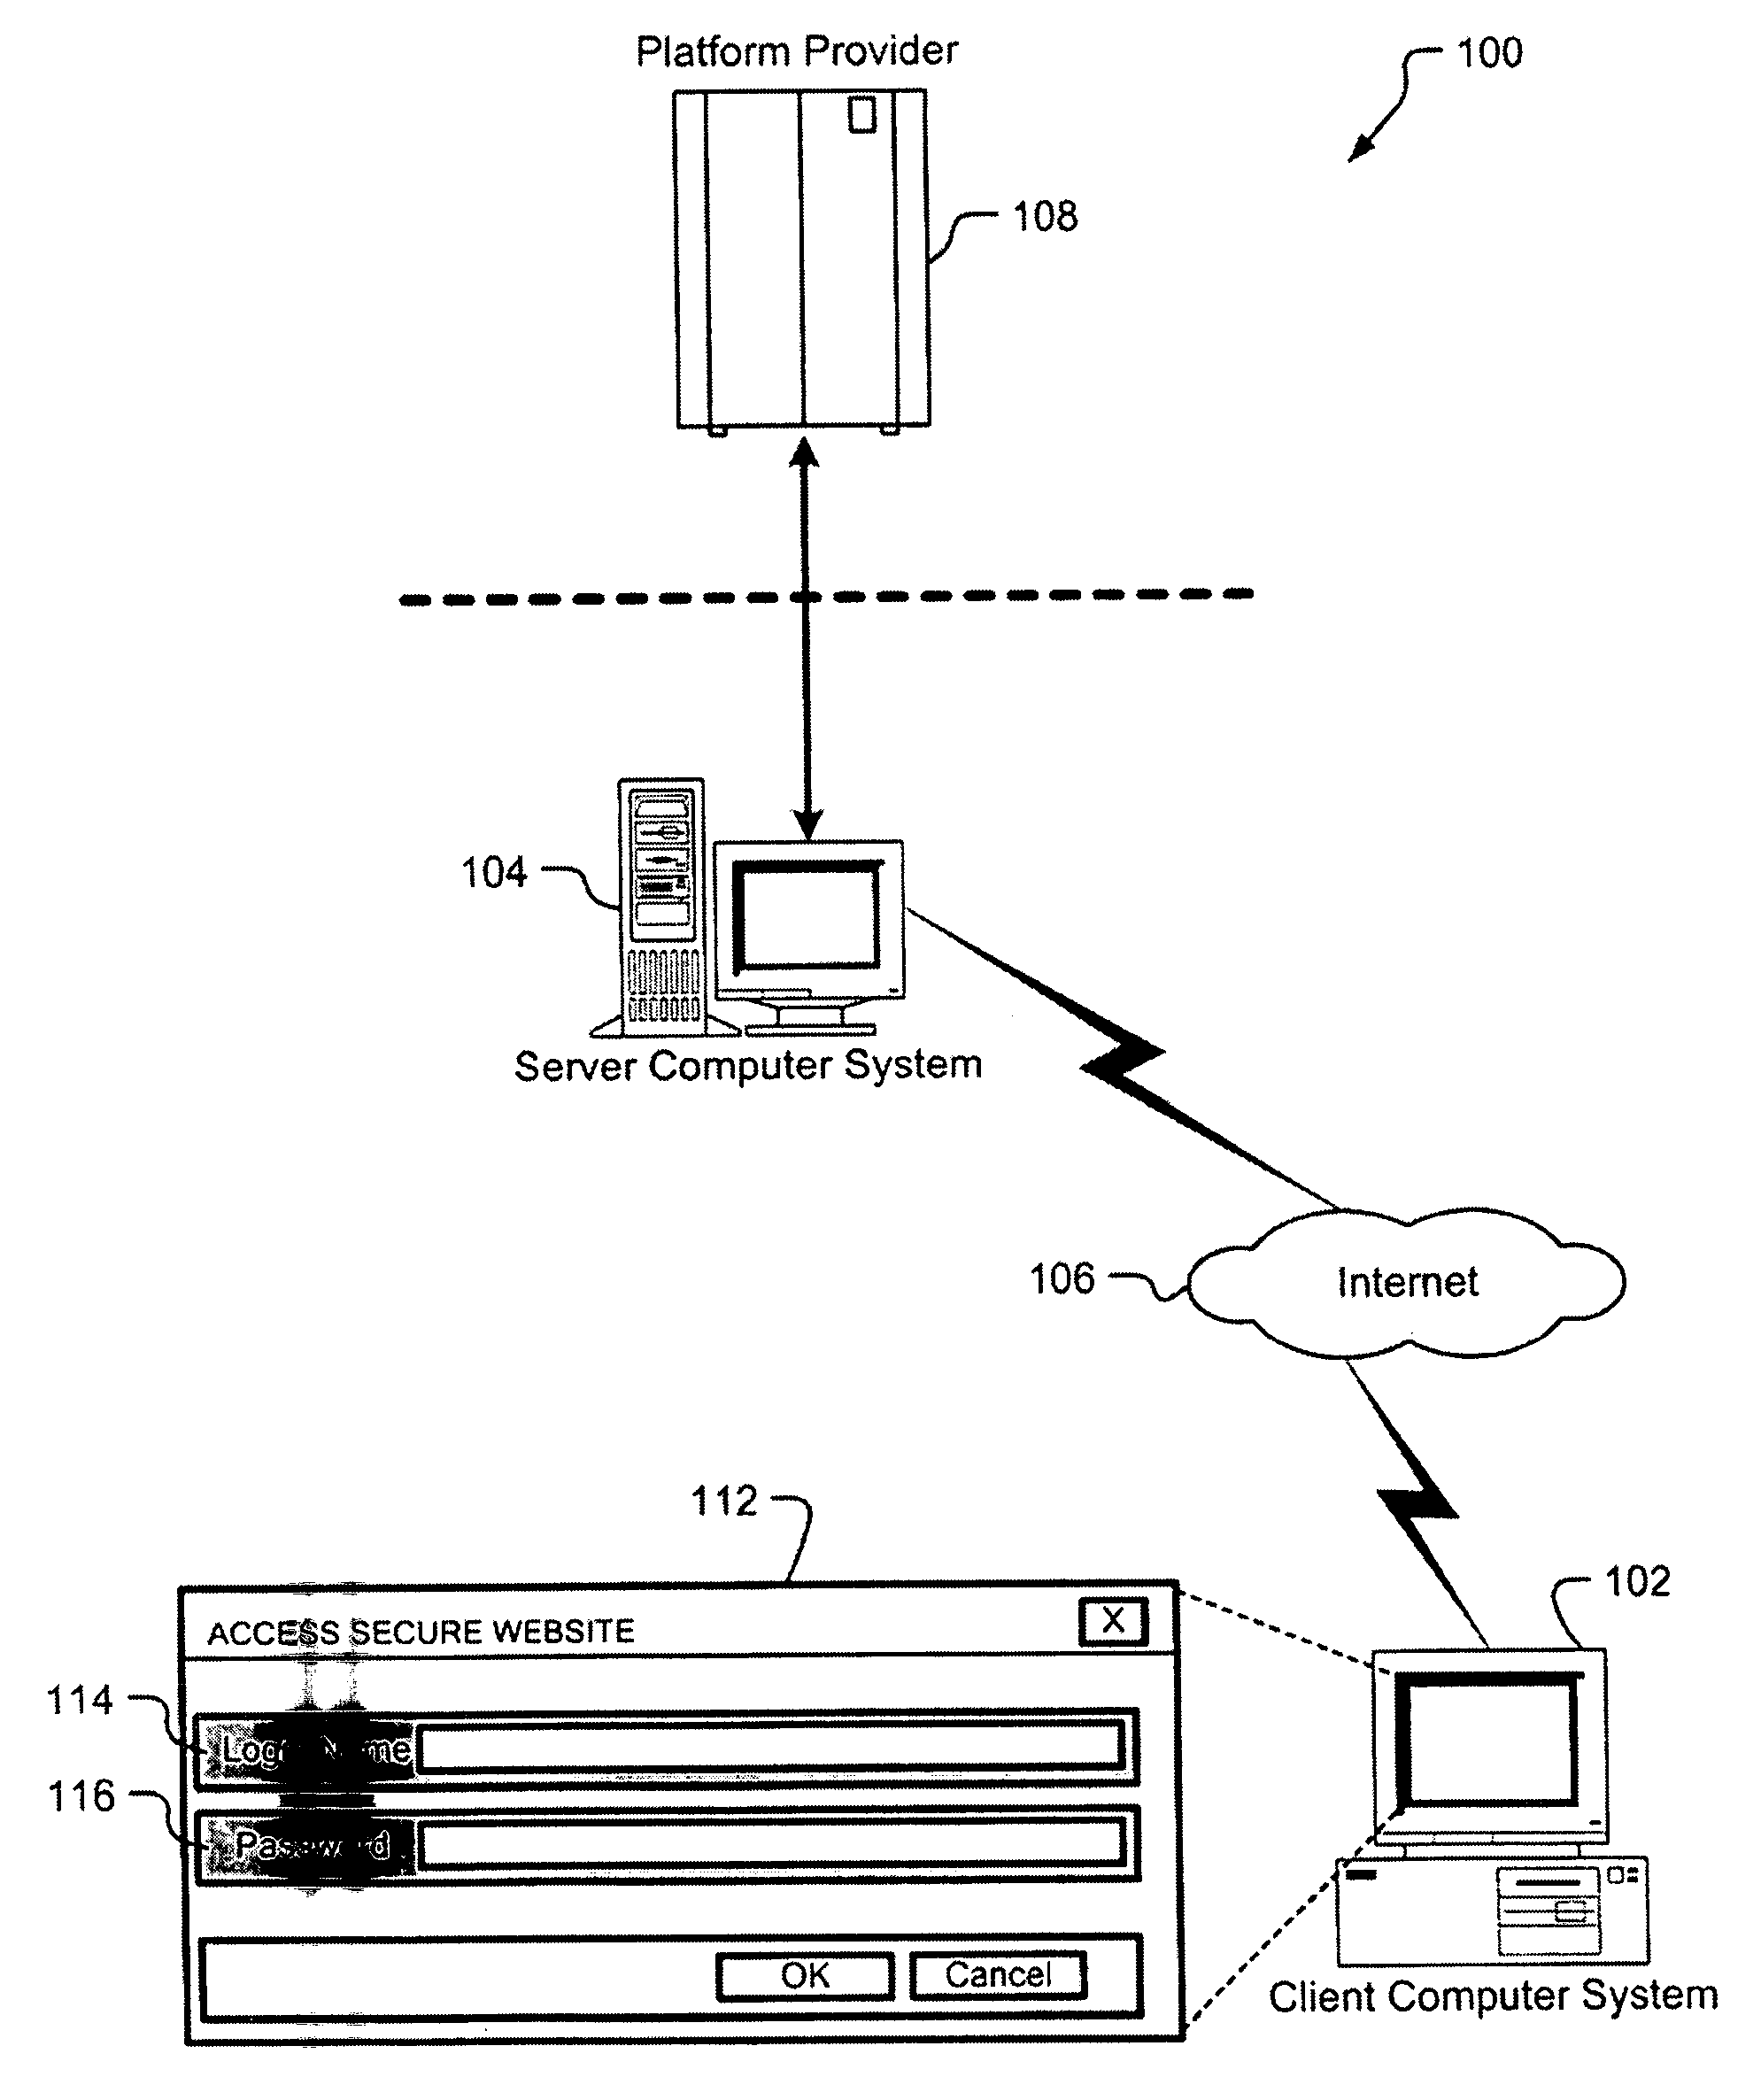 Method and System for Providing Long Distance Service